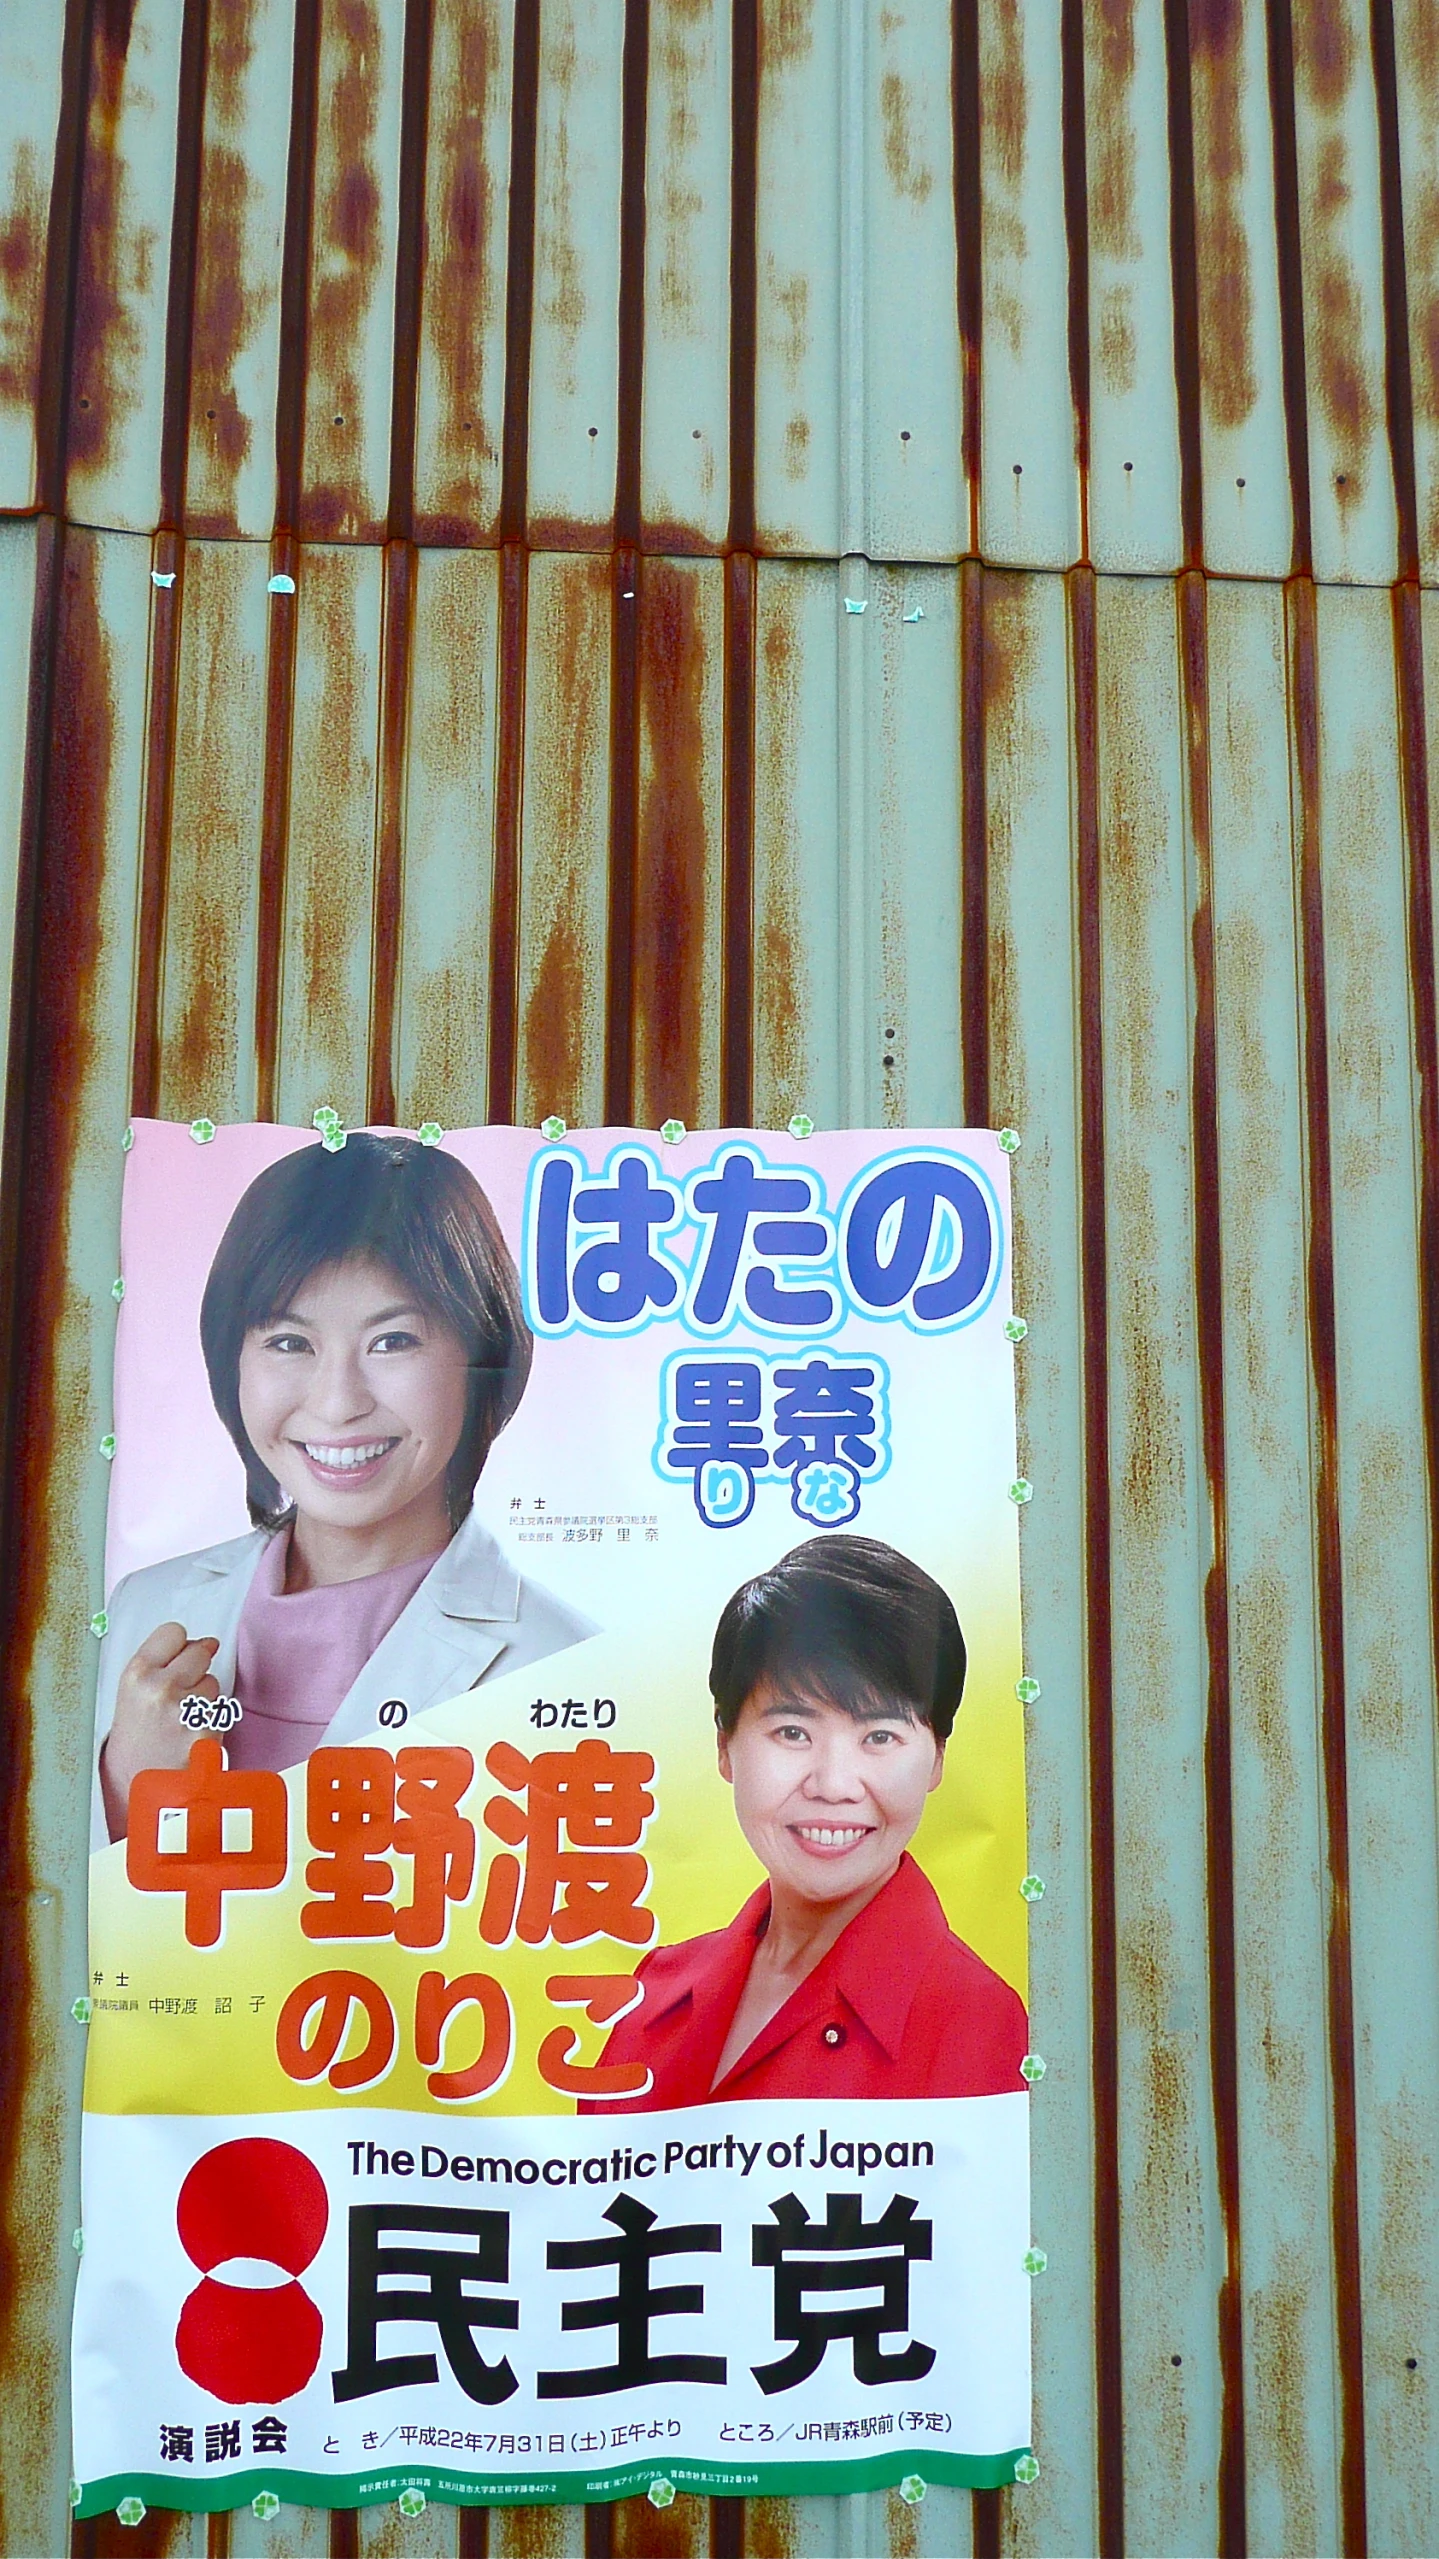 a poster hanging off of the side of a corrugated metal structure